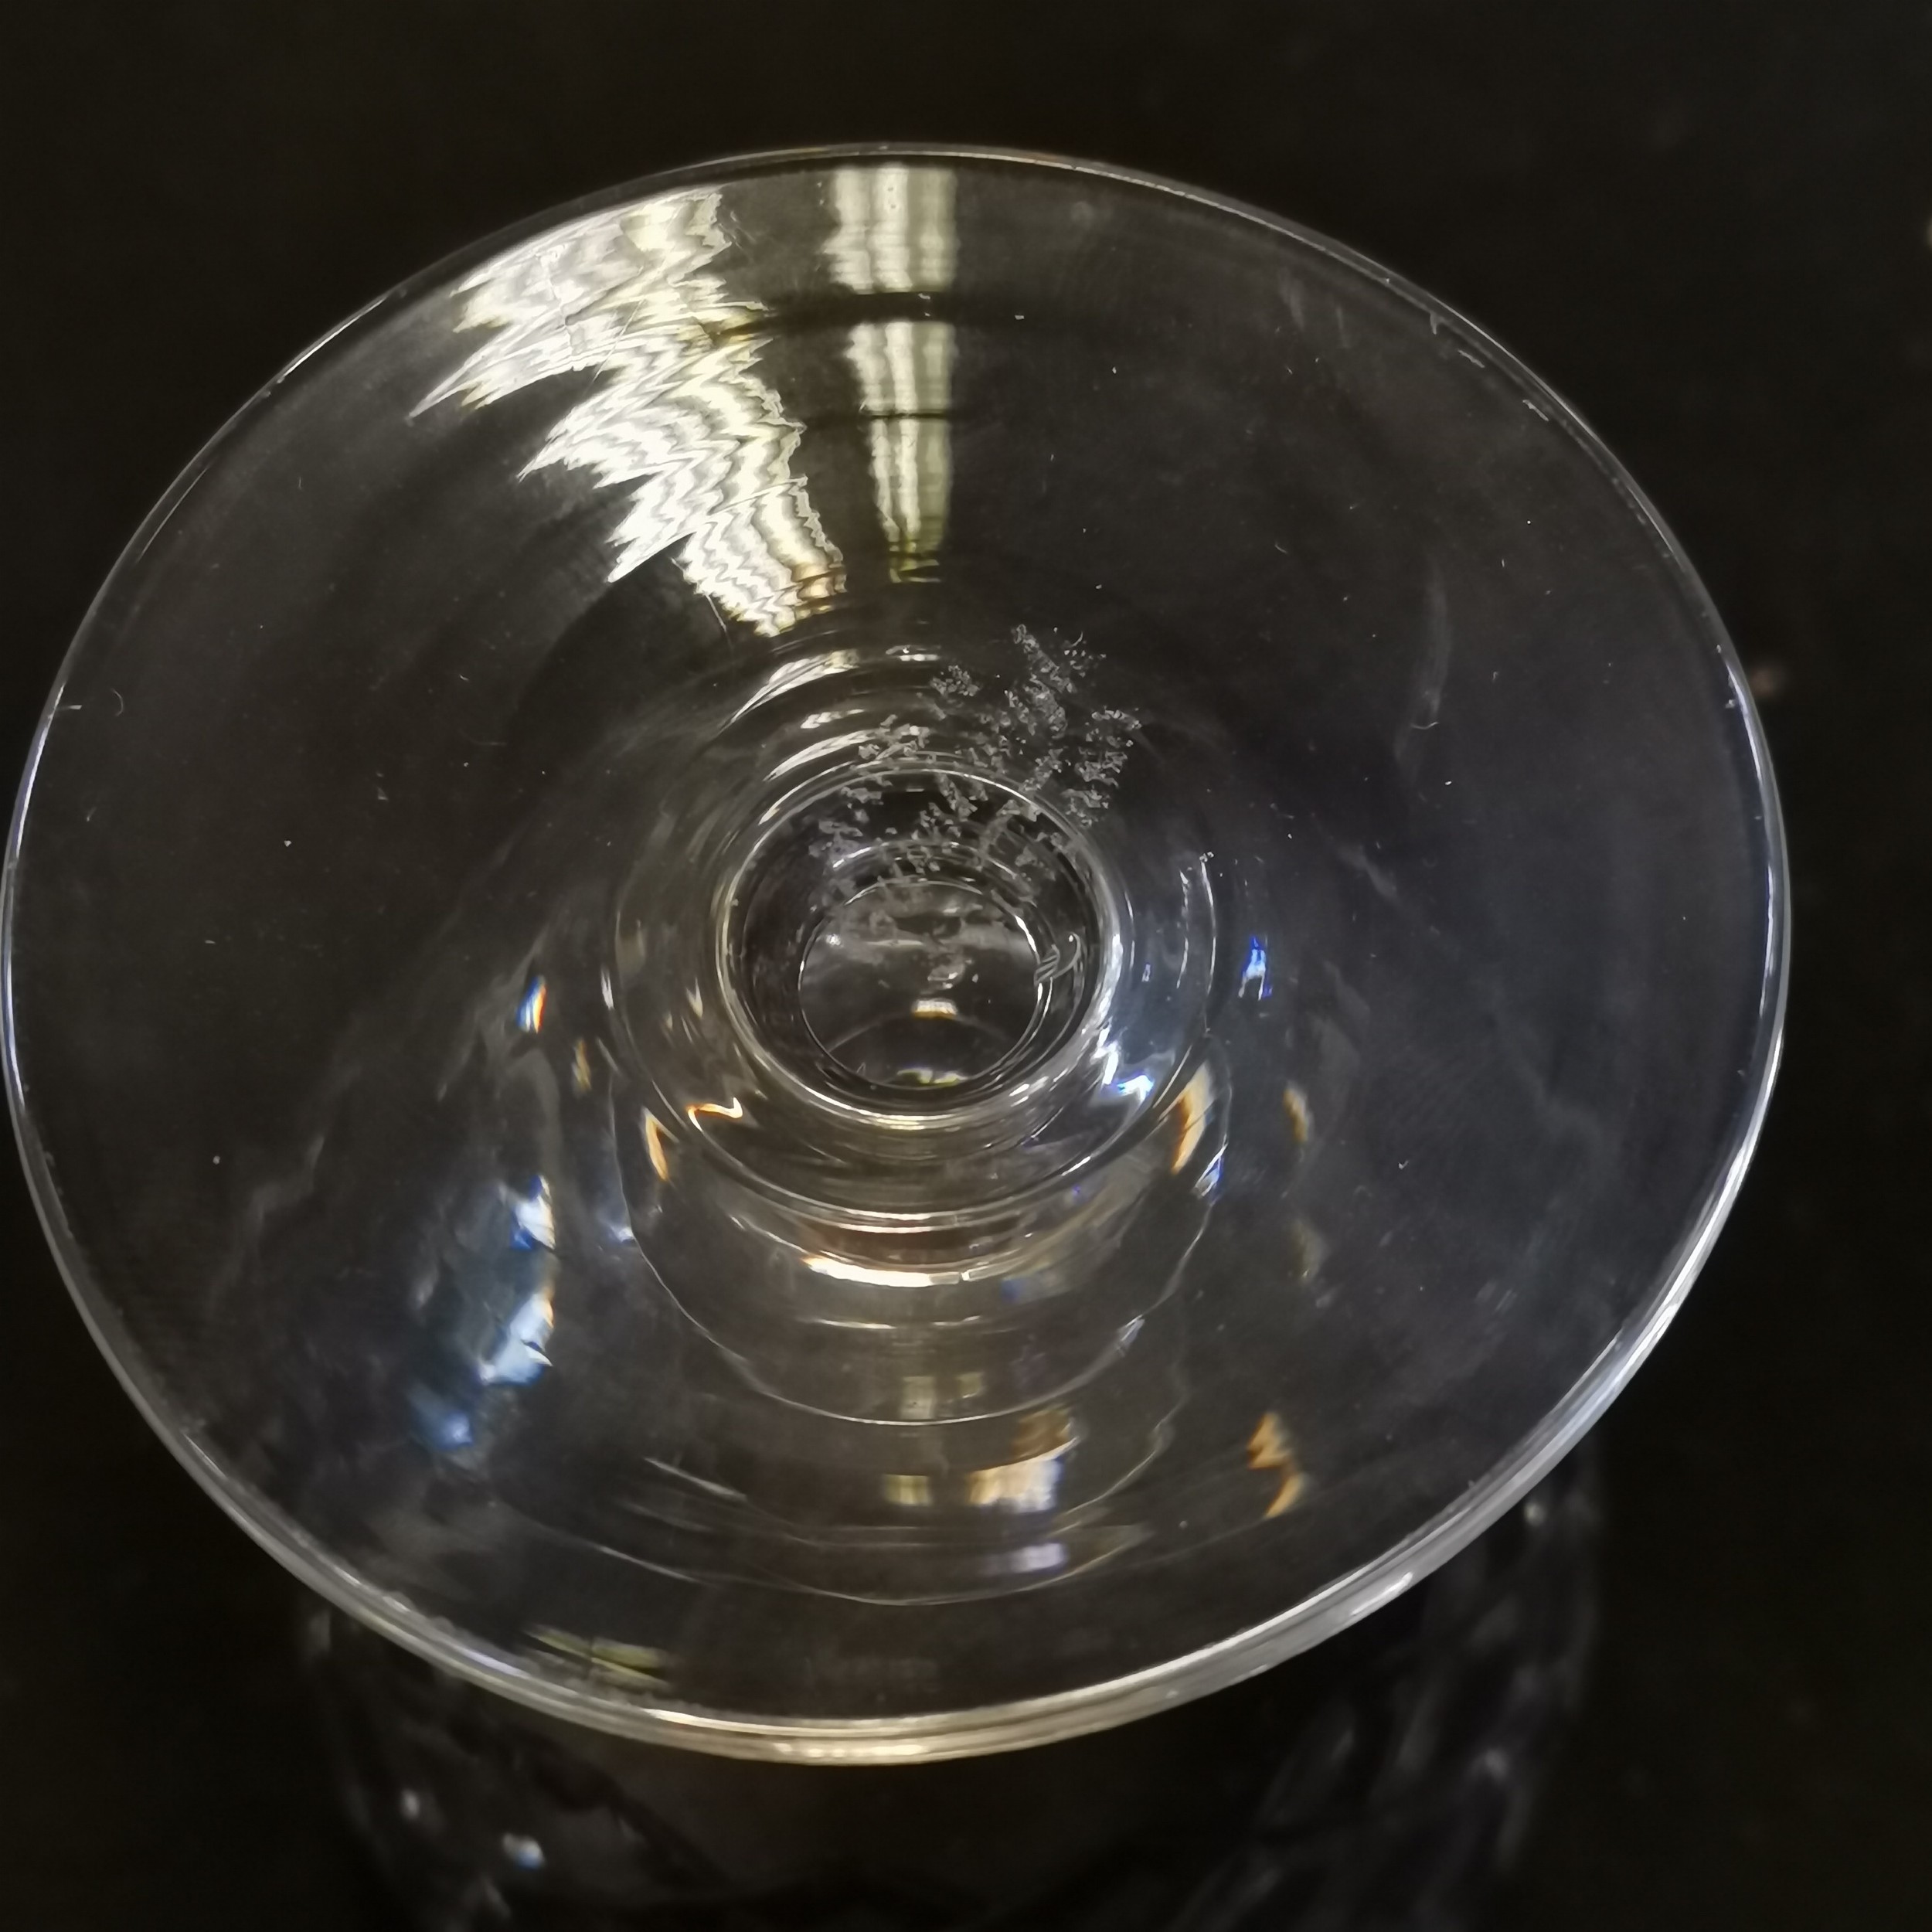 18 Edinburgh crystal glasses T/W a quantity of glasses - no obvious damage - Image 6 of 6